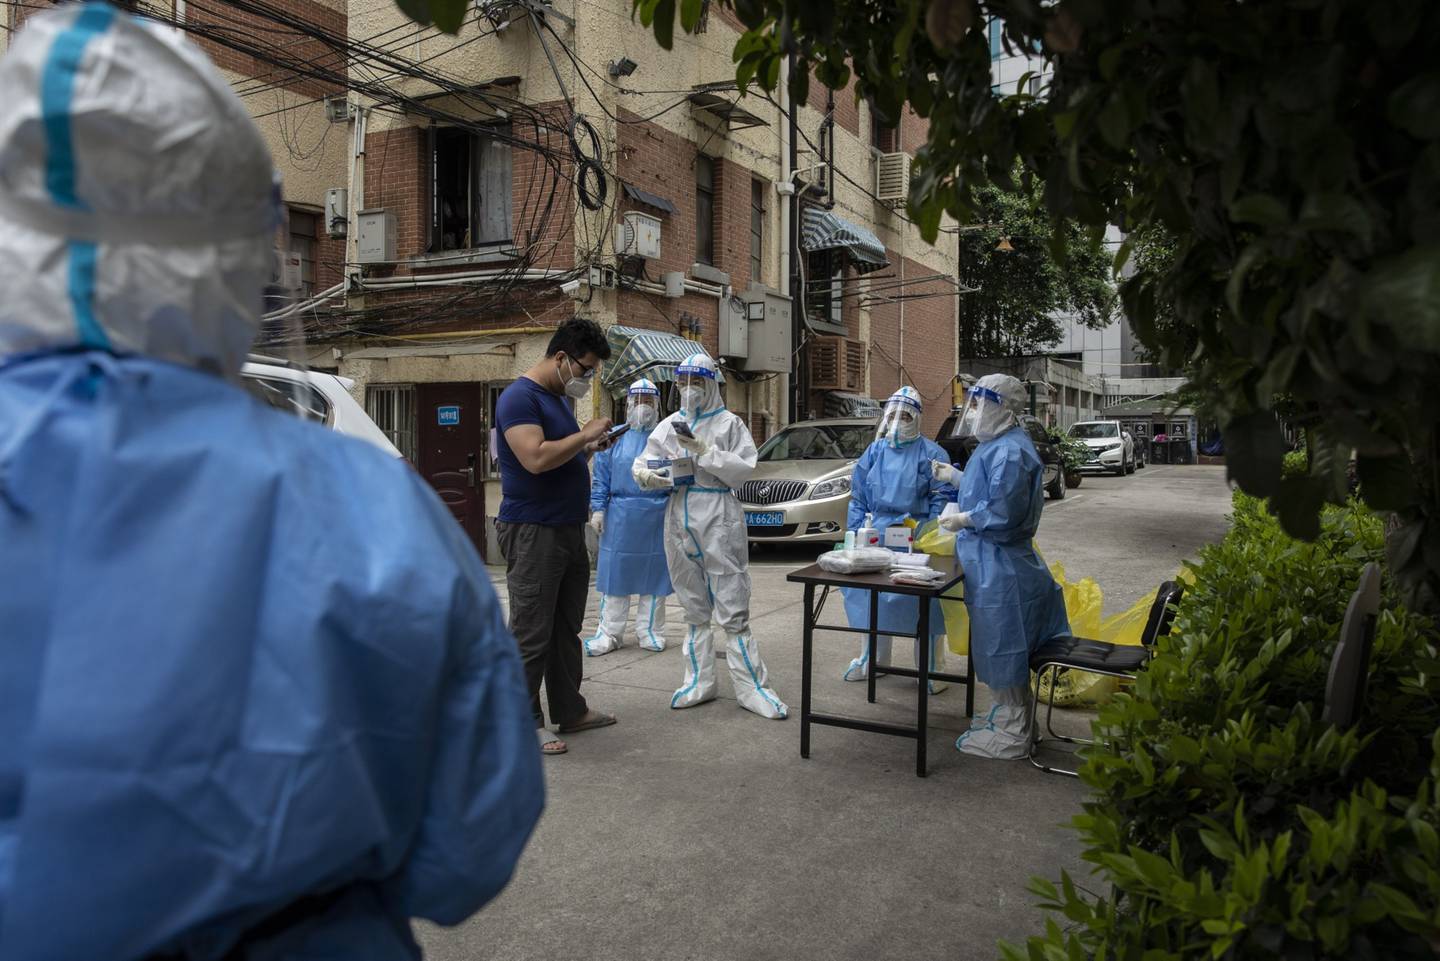 A team of health workers and volunteers in personal protective equipment (PPE) as a resident arrives at a Covid-19 testing station at a neighbourhood where a suspected flare up in cases occurred in Shanghai, China, on Monday, May 9, 2022. The ramping up of restrictions comes even as the city reported its fewest cases in more than six weeks, with 3,947 new infections on Sunday, down slightly from 3,975 on Saturday. Photographer: Qilai Shen/Bloombergdfd